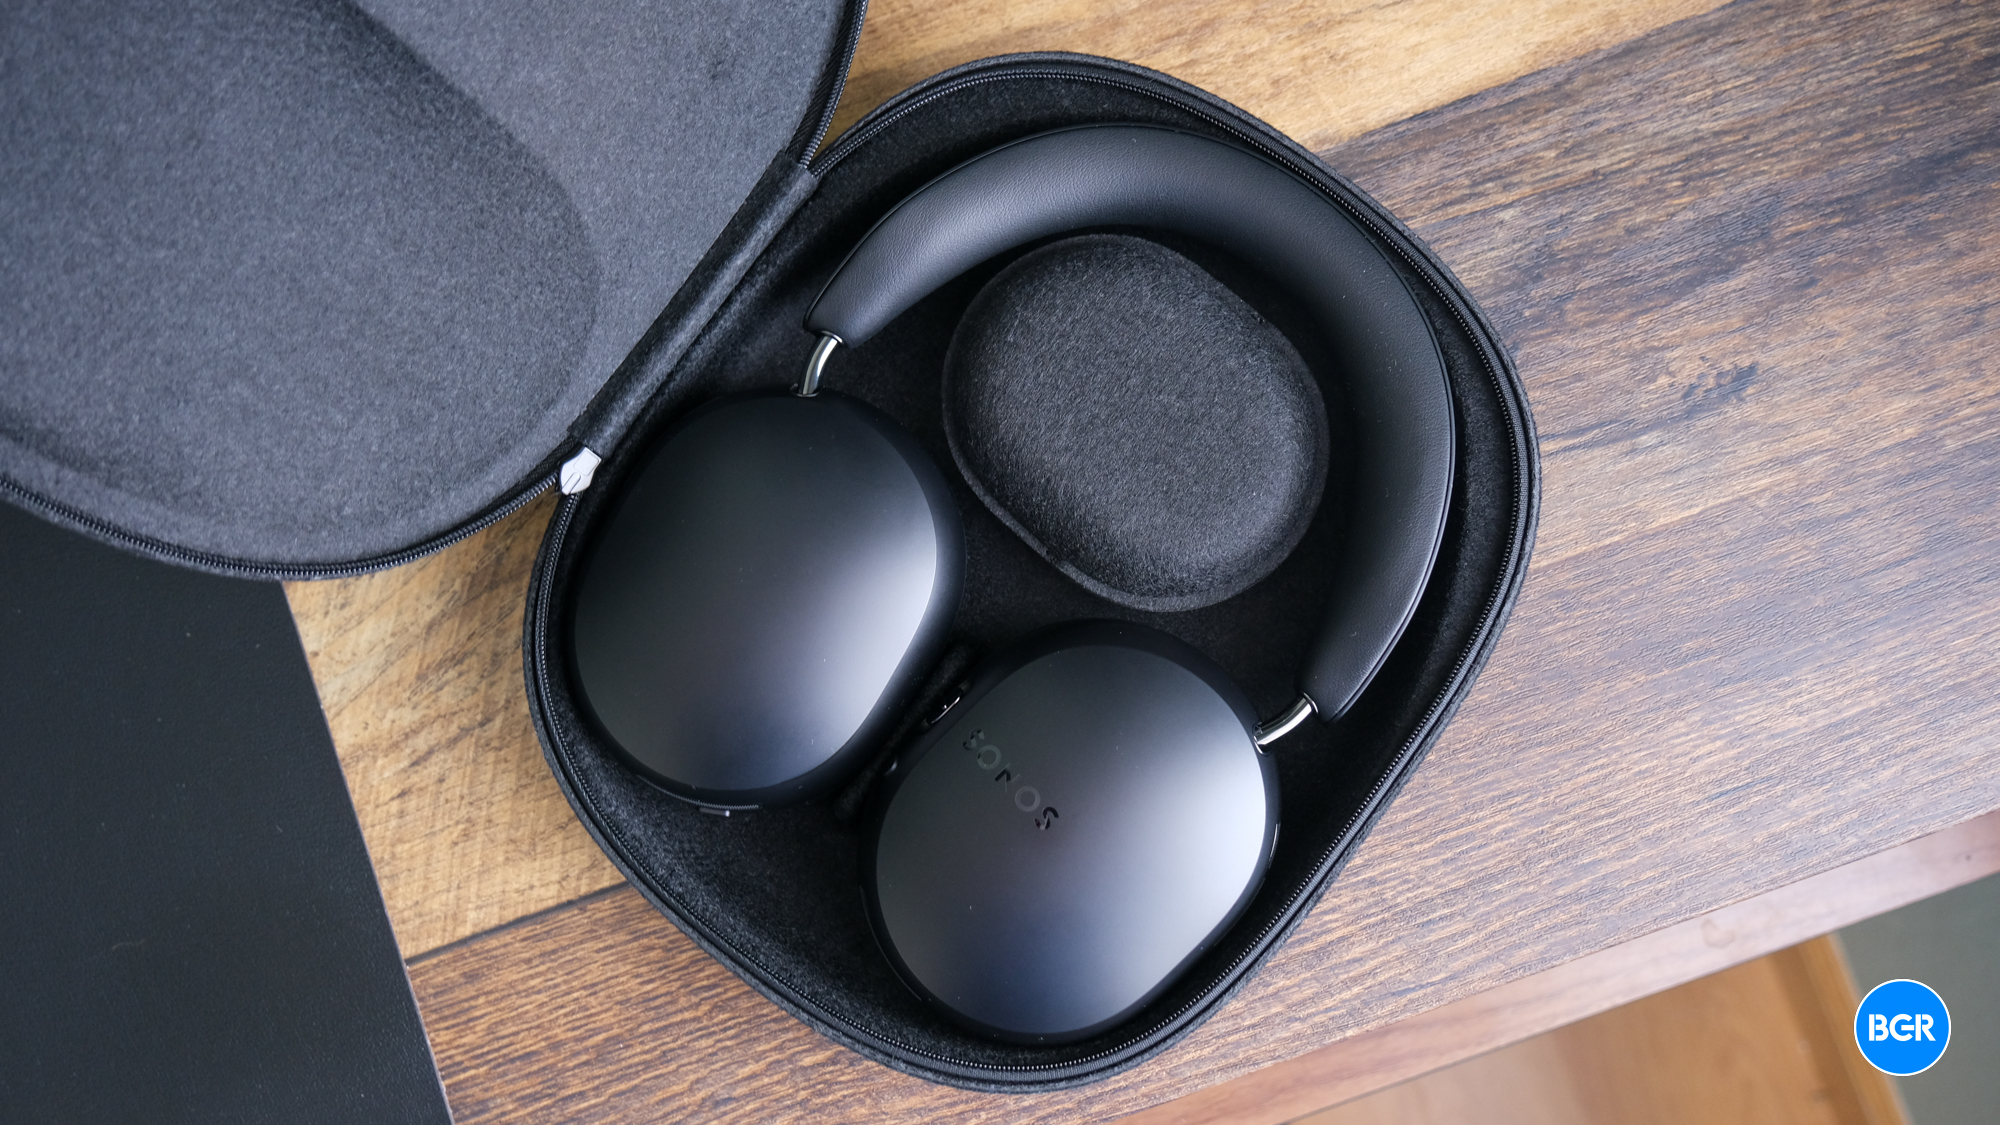 Sonos Ace headphones in the included hard case